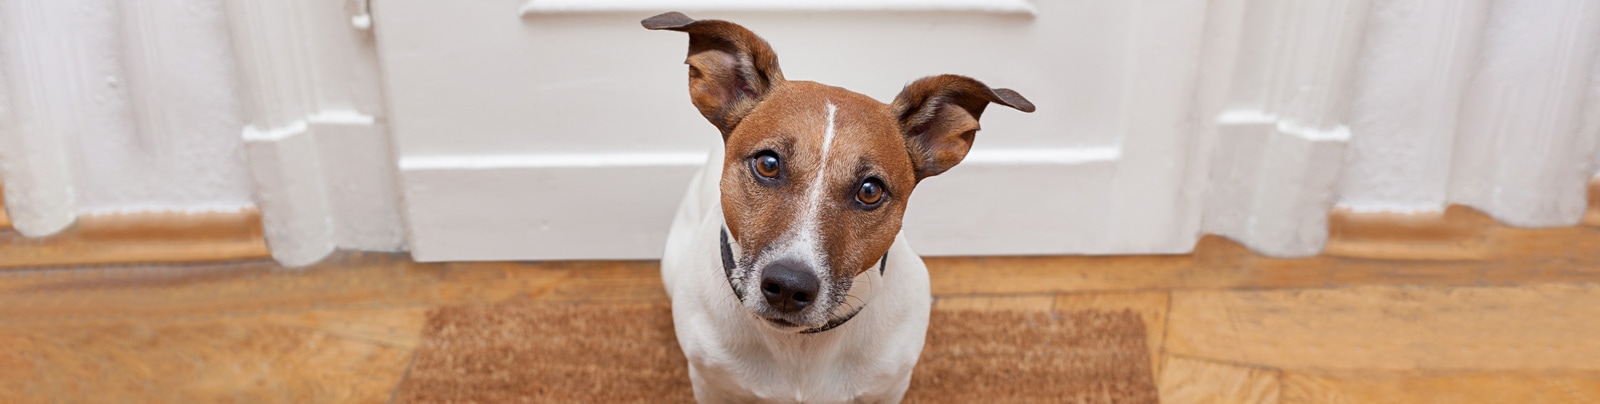 Exploring the typical causes of ear issues in dogs